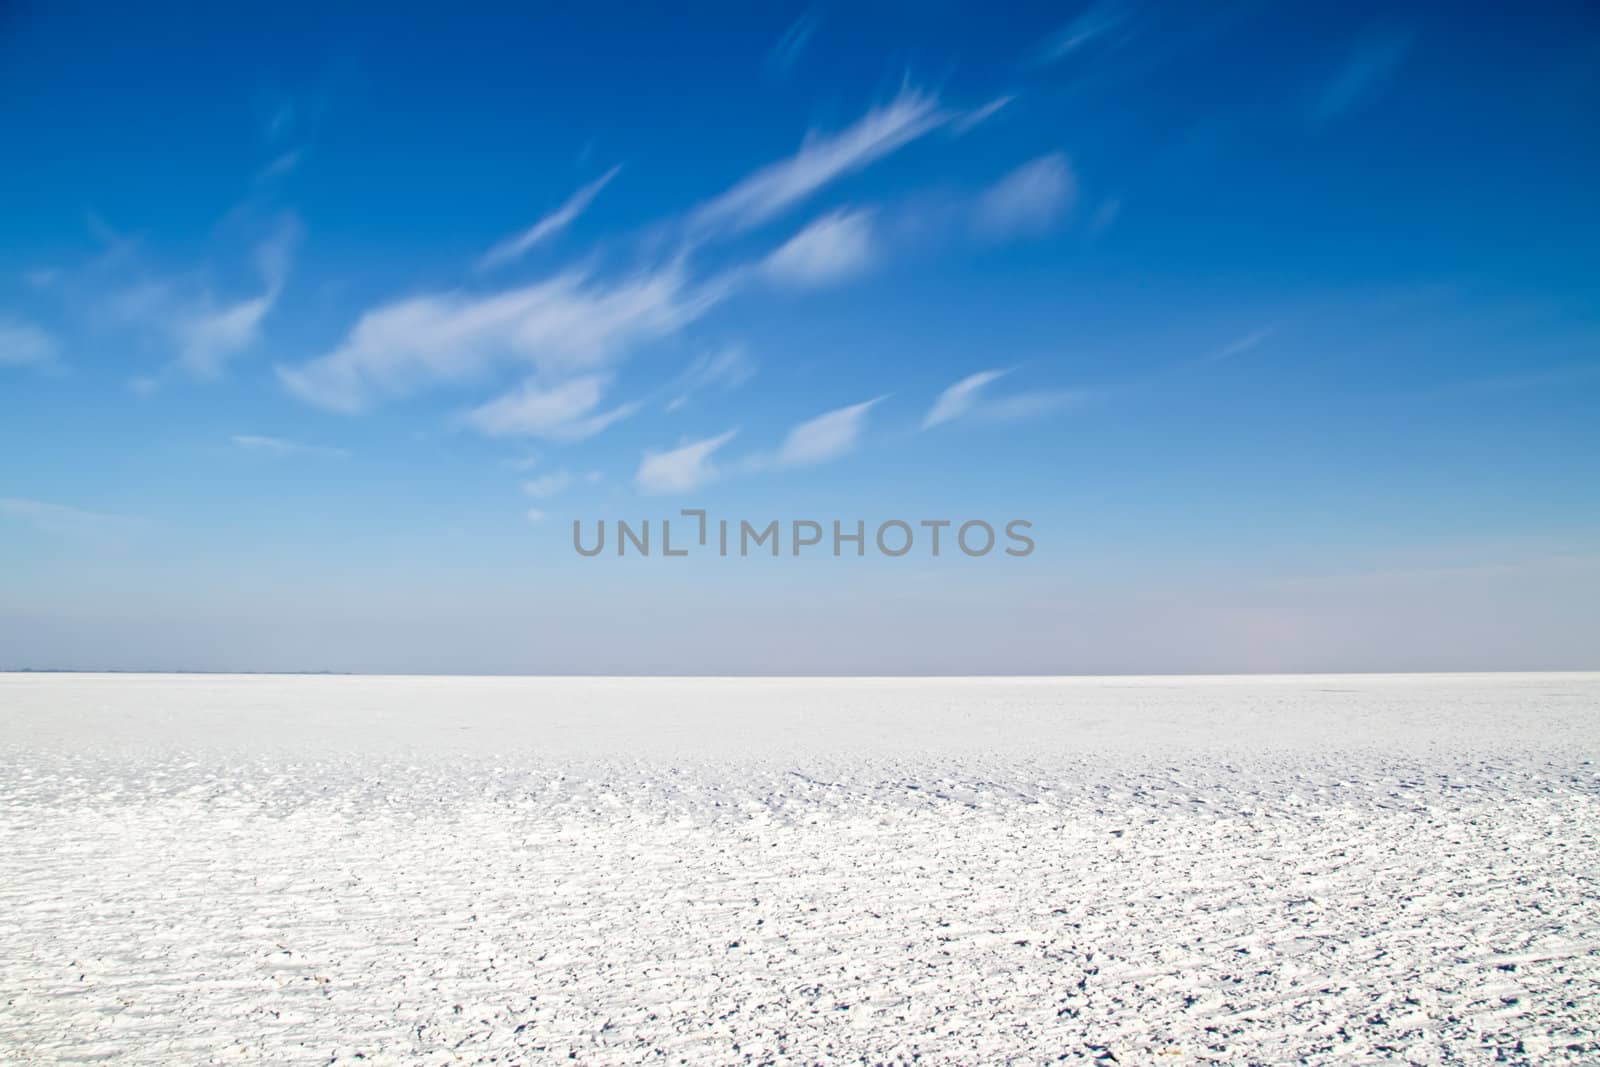 Ice and snow on the IJsselmeer in the Netherlands